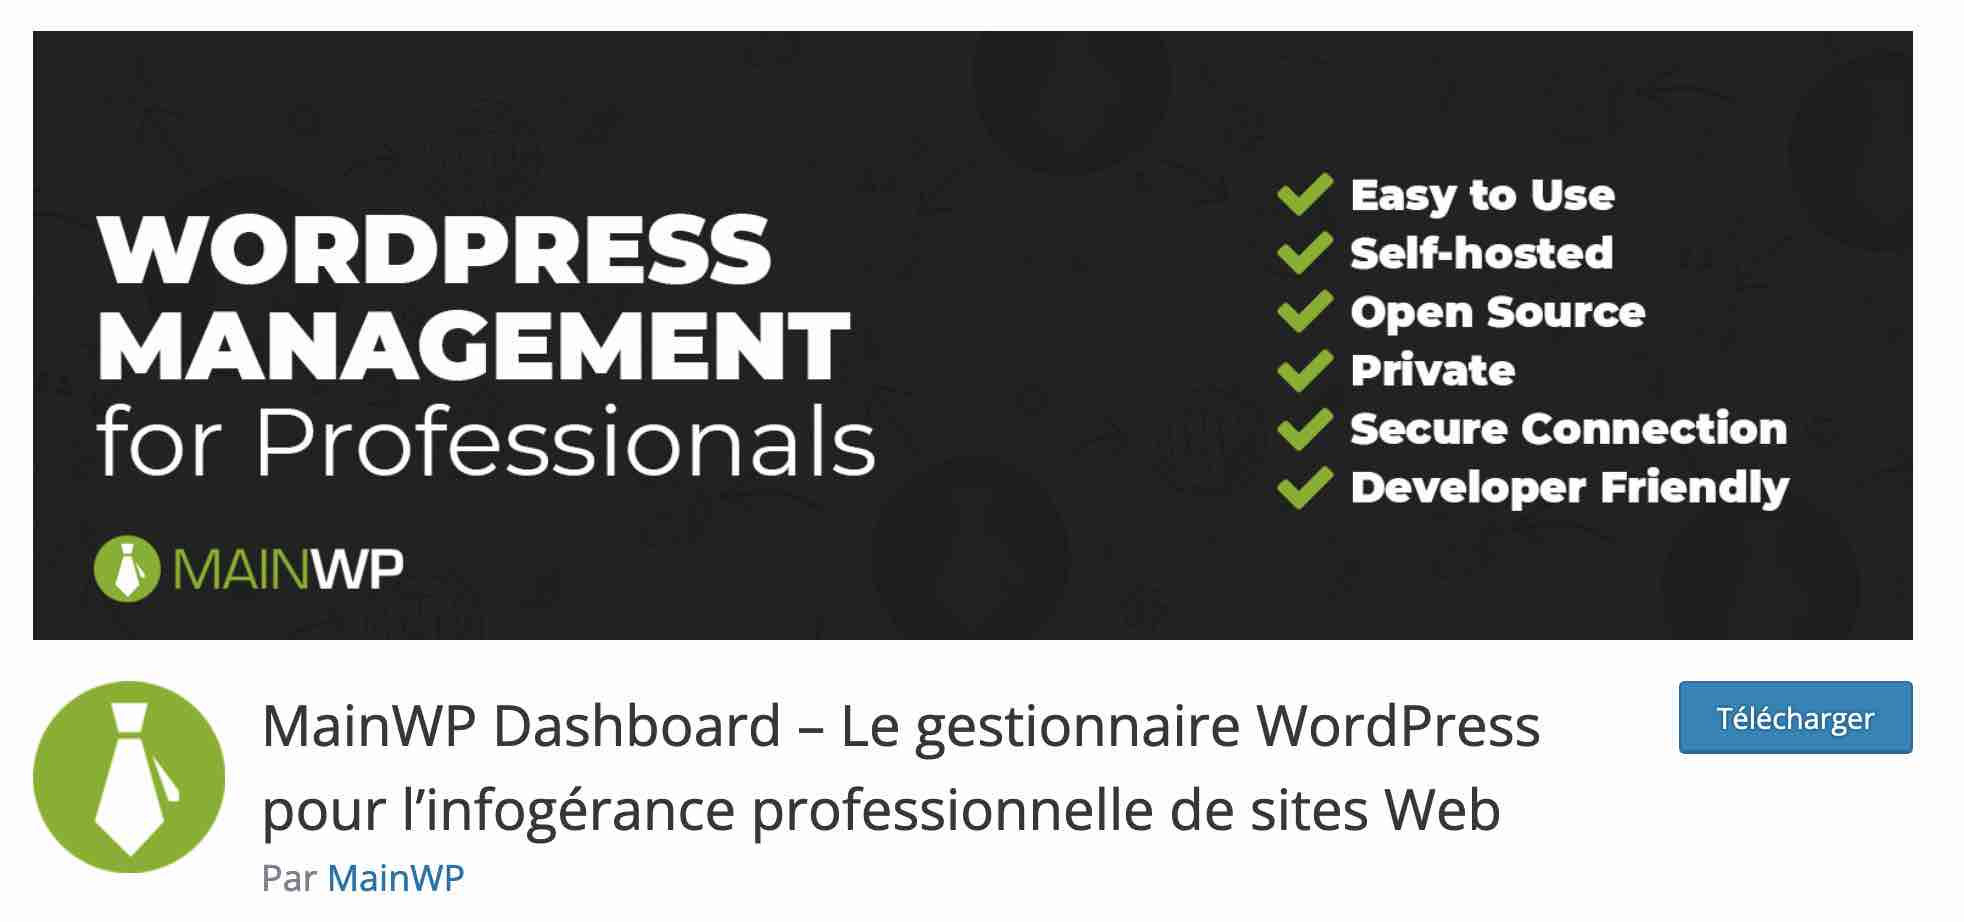 MainWP is an extension that allows you to manage the maintenance of your WordPress sites.